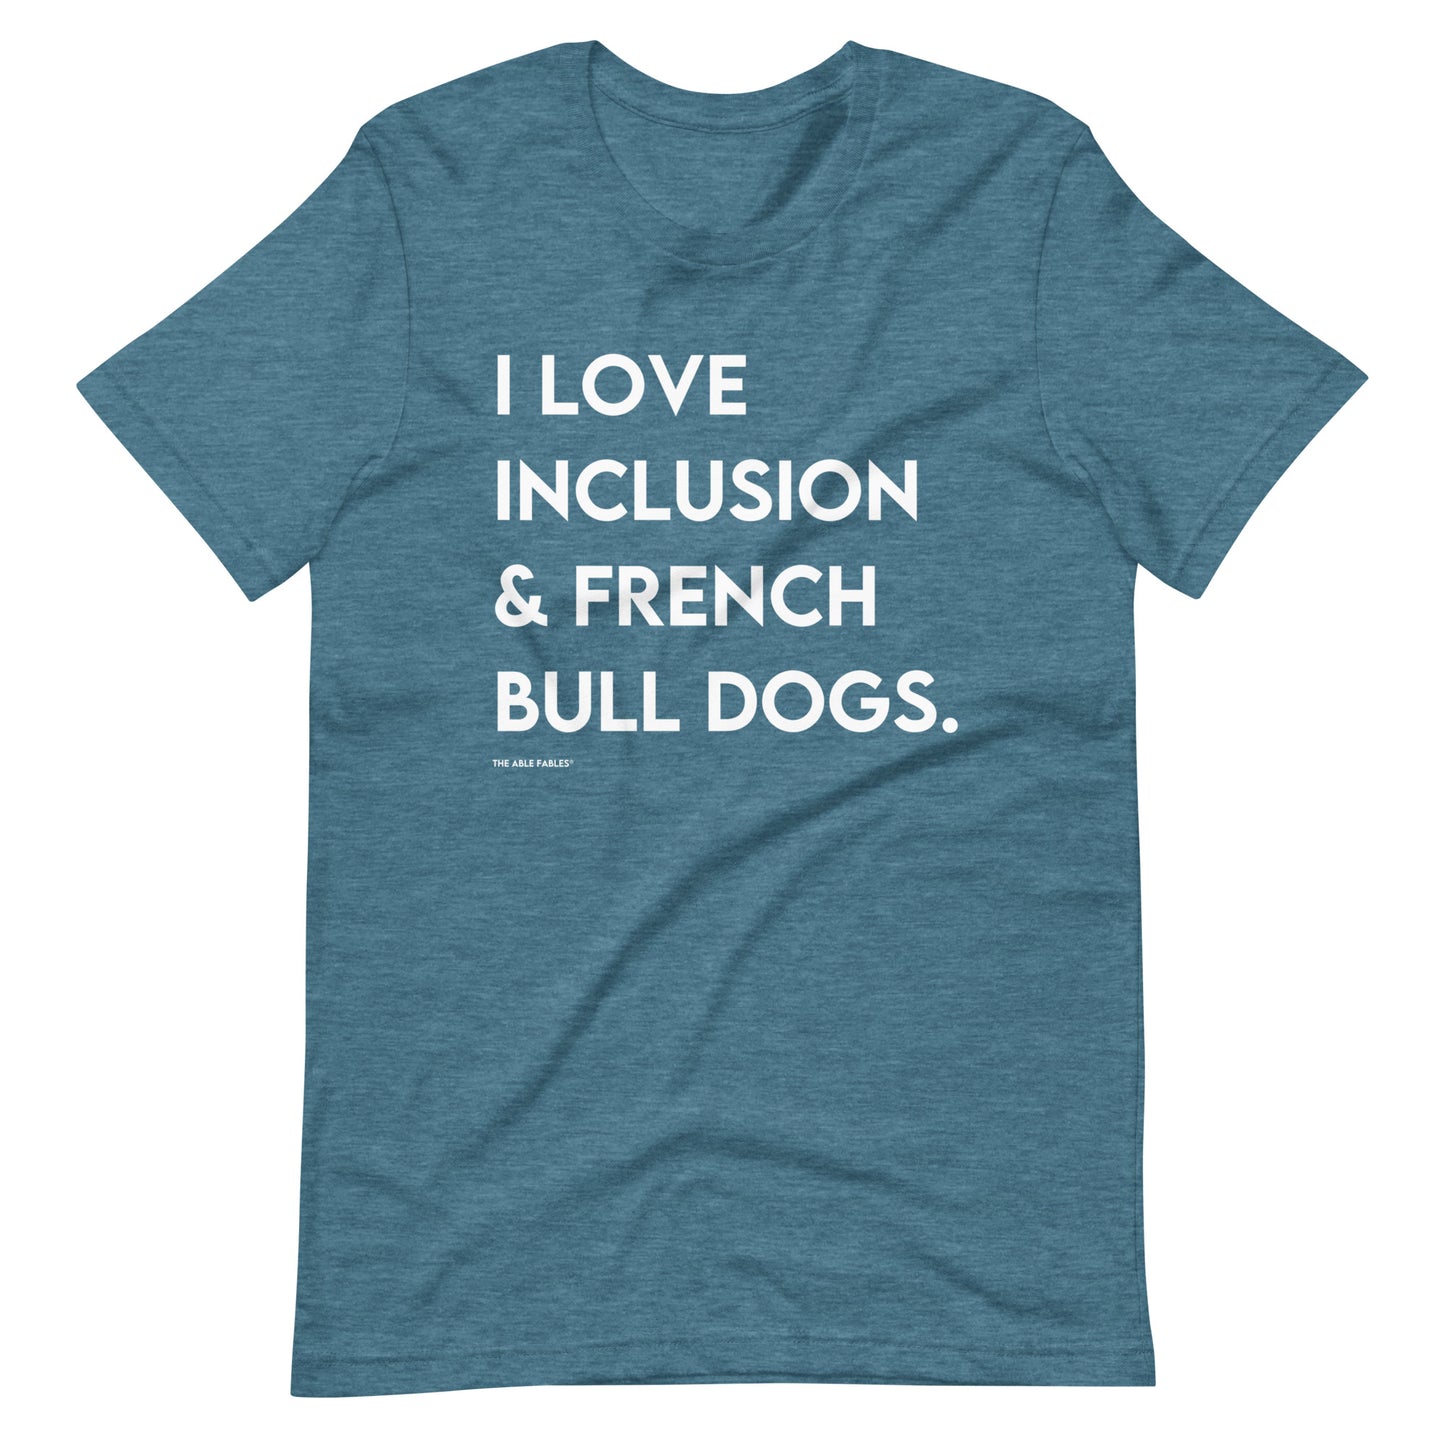 "I Love Inclusion & French Bull Dogs" Adult Unisex Tee